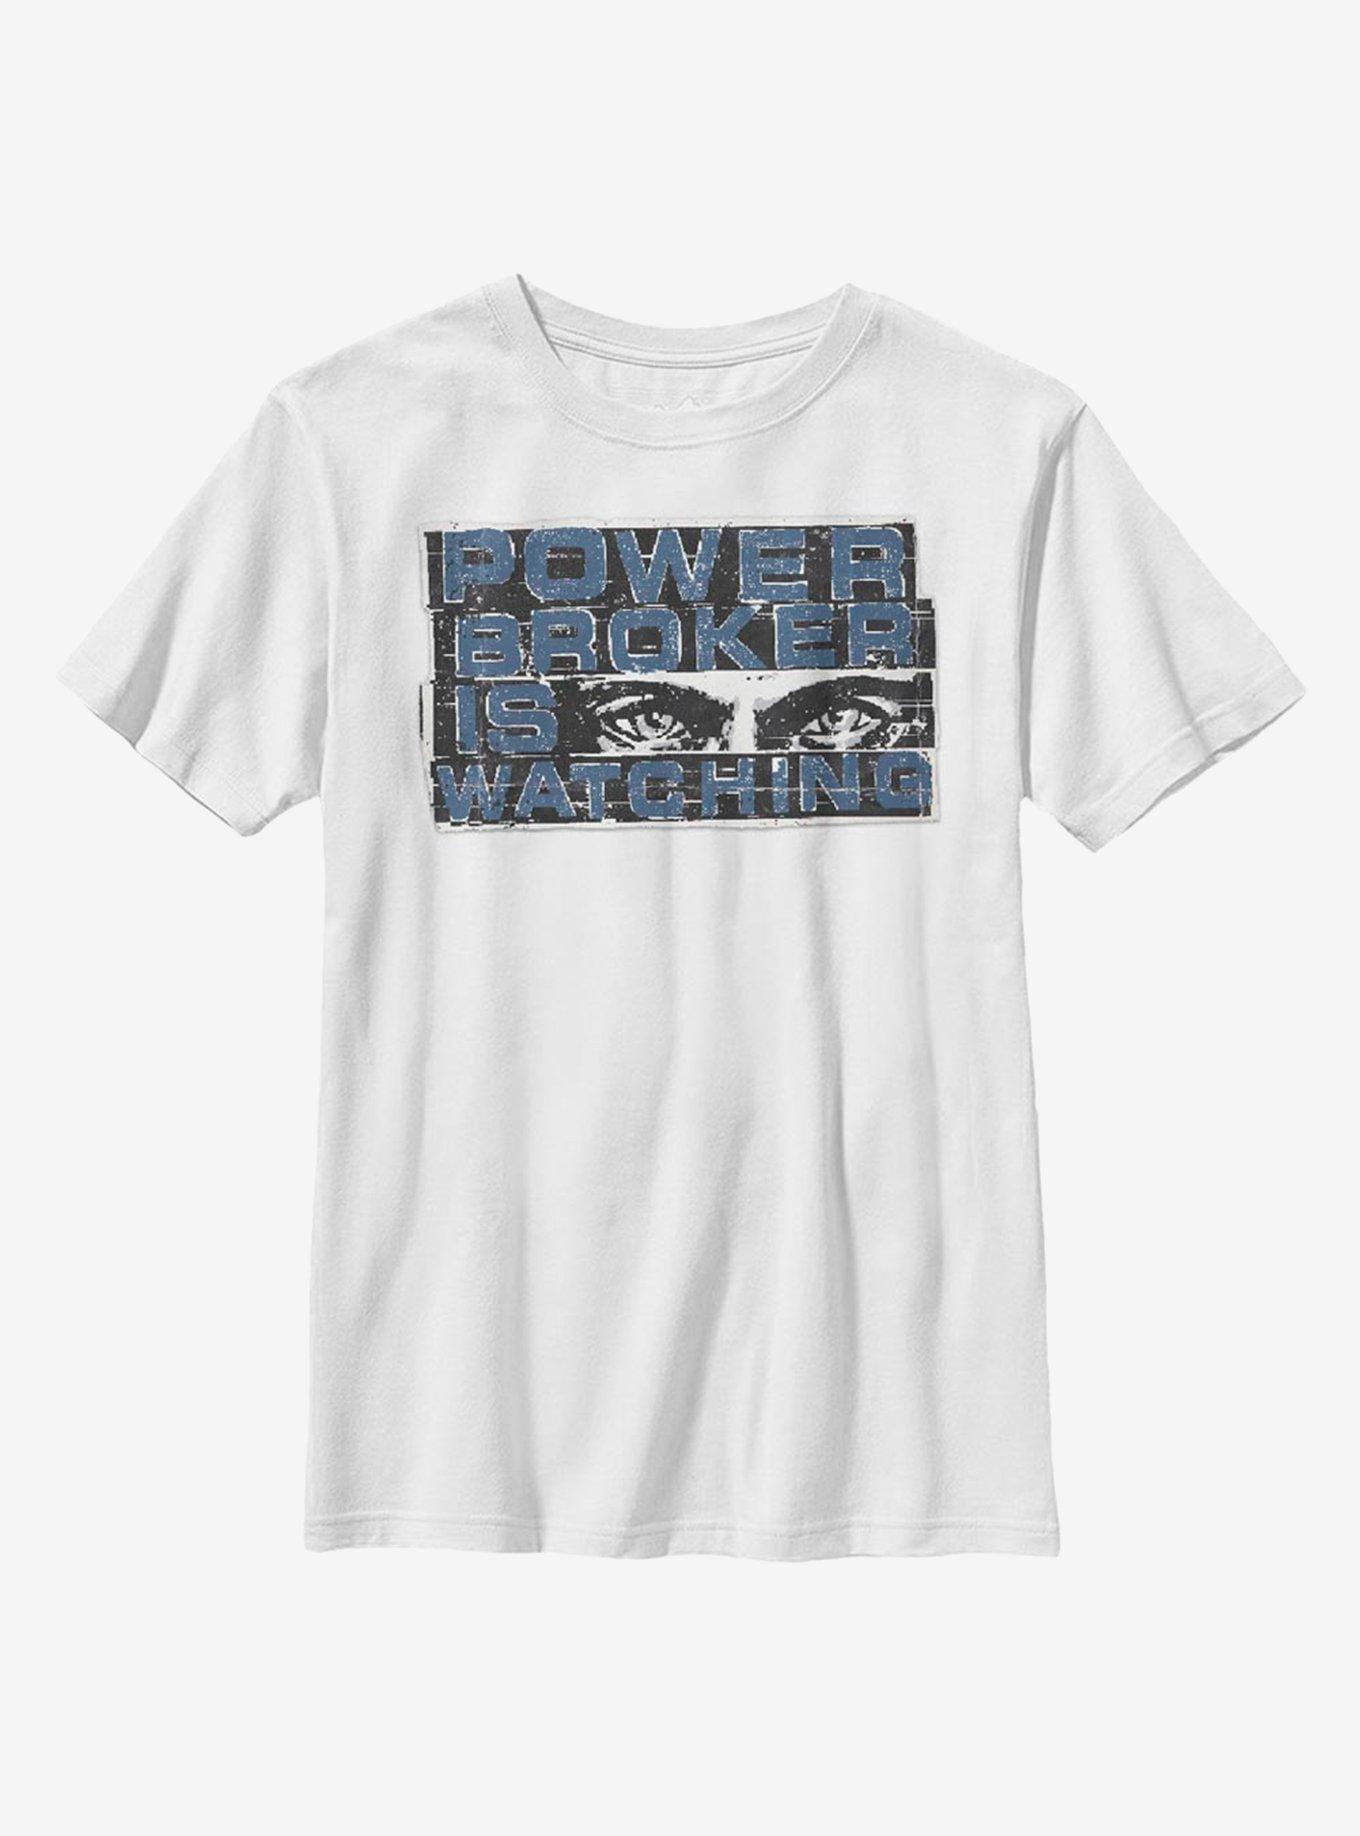 Marvel The Falcon And The Winter Soldier Power Broker Youth T-Shirt, WHITE, hi-res